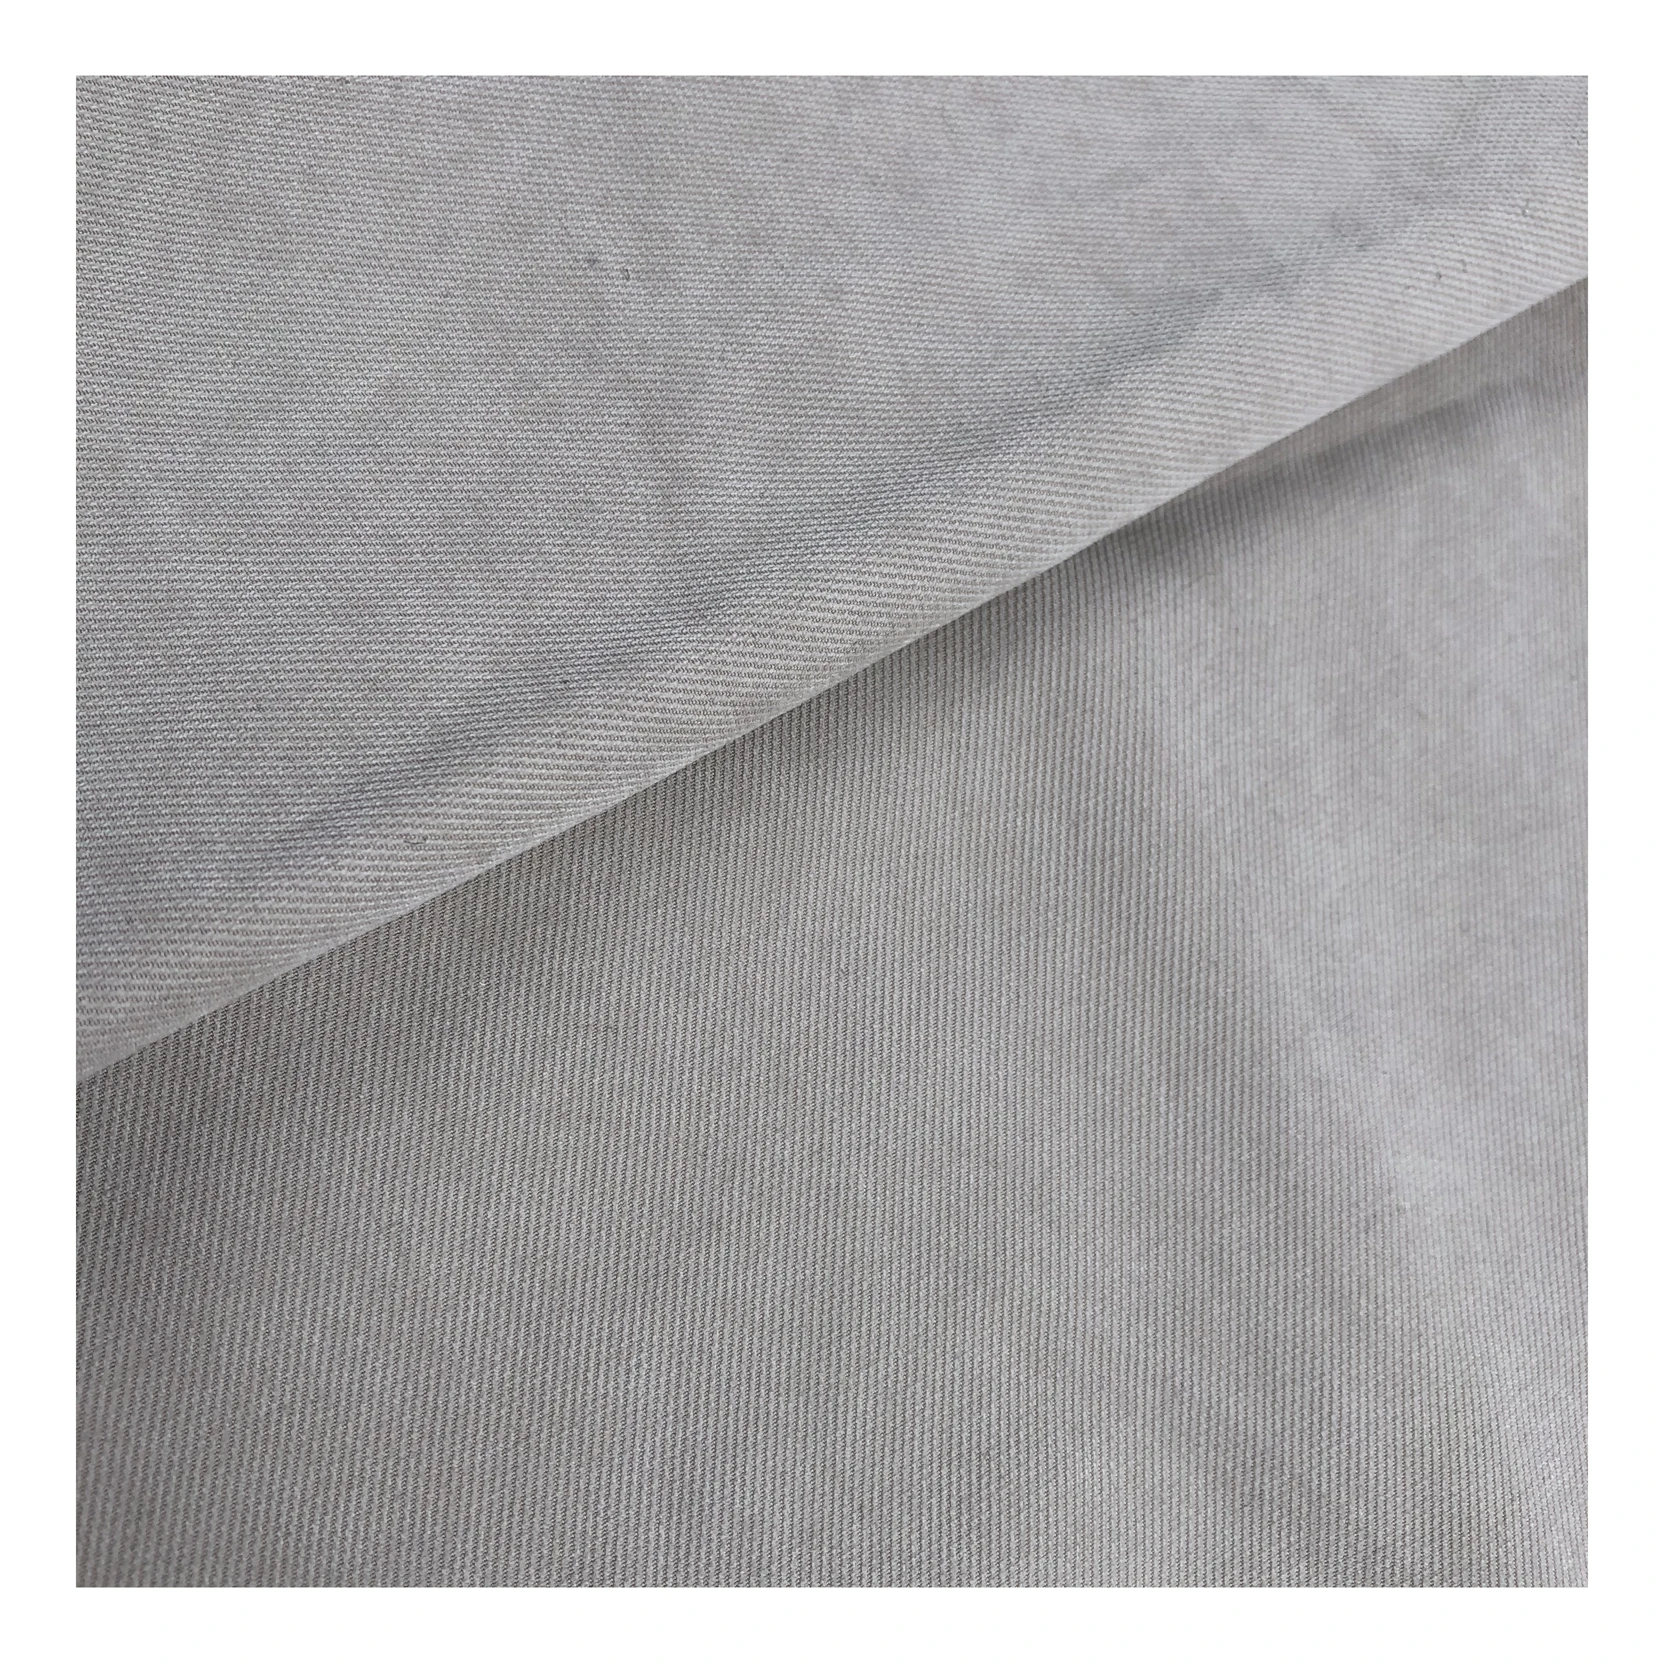 Cheap curpo polyester twill fabric polyester woven fabric polyester viscose fabric for lady dress garment